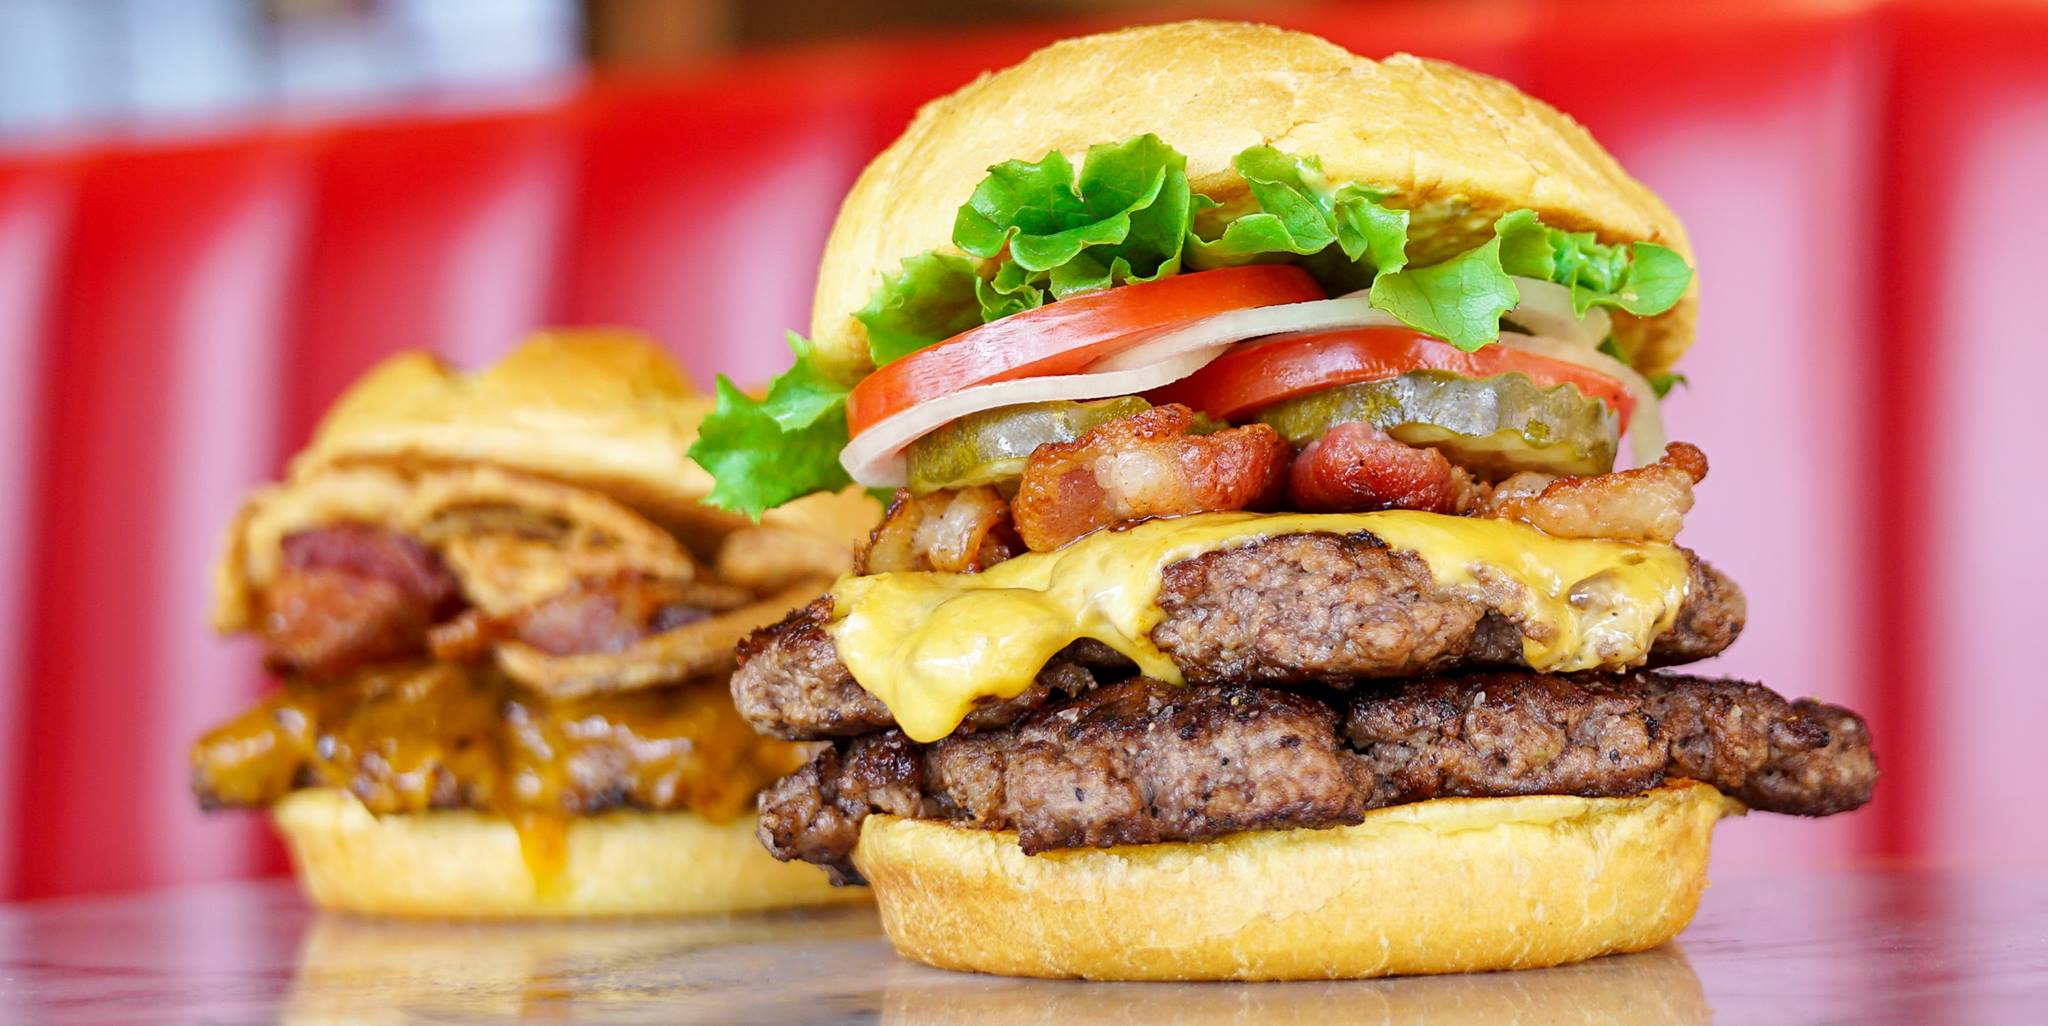 Ends soon! Smashburger: Get any entrée for $4 with coupon